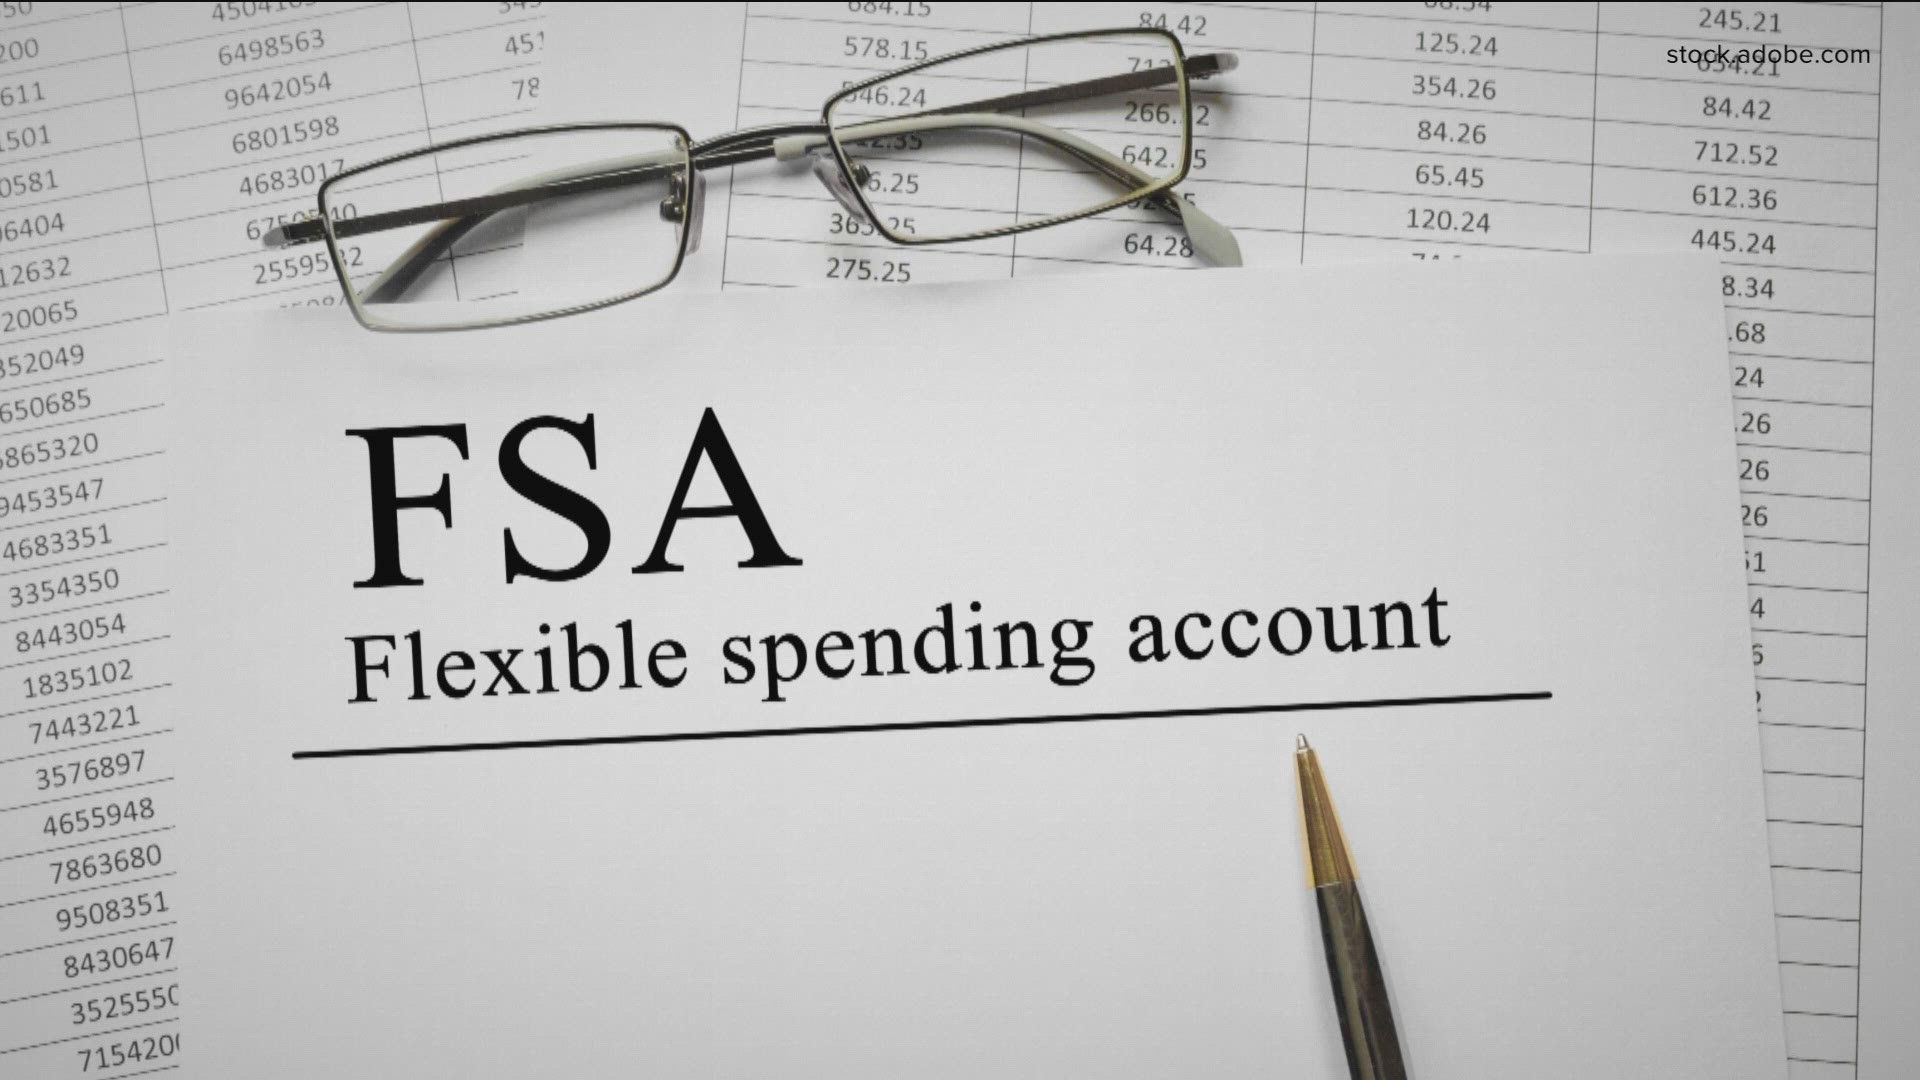 20 Ways to Use Up Your Flexible Spending Account